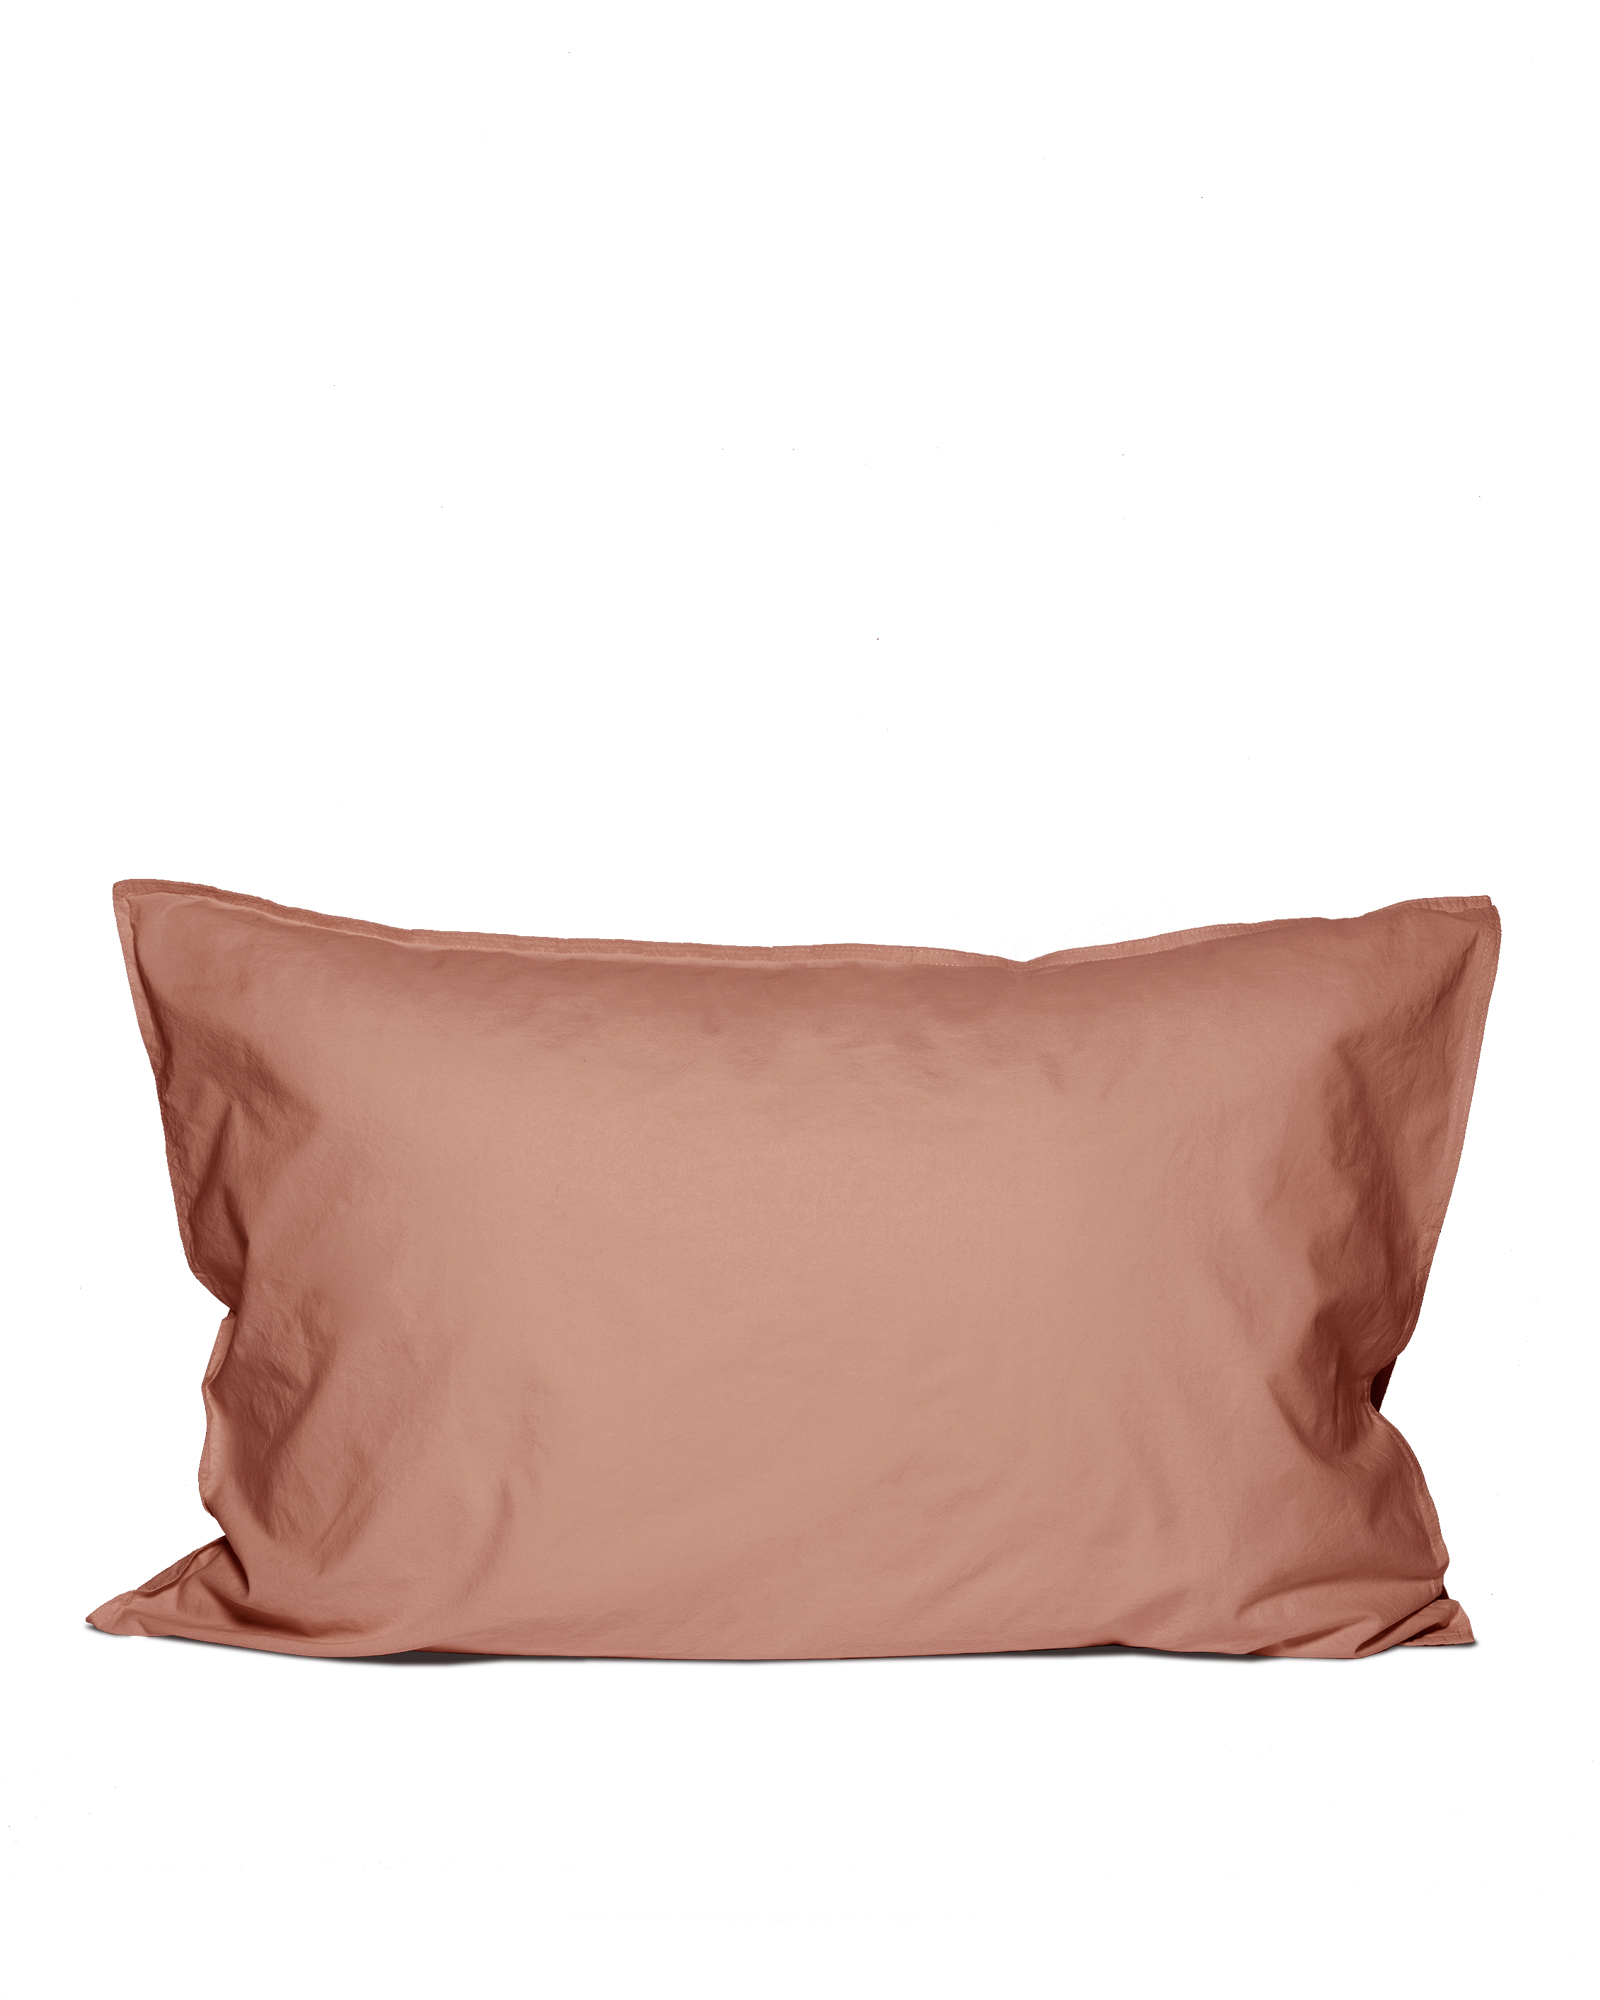 MARIE-MARIE - Taie d'oreiller VINTAGE COTTON Rosewood - 50x75 cm - Rosewood